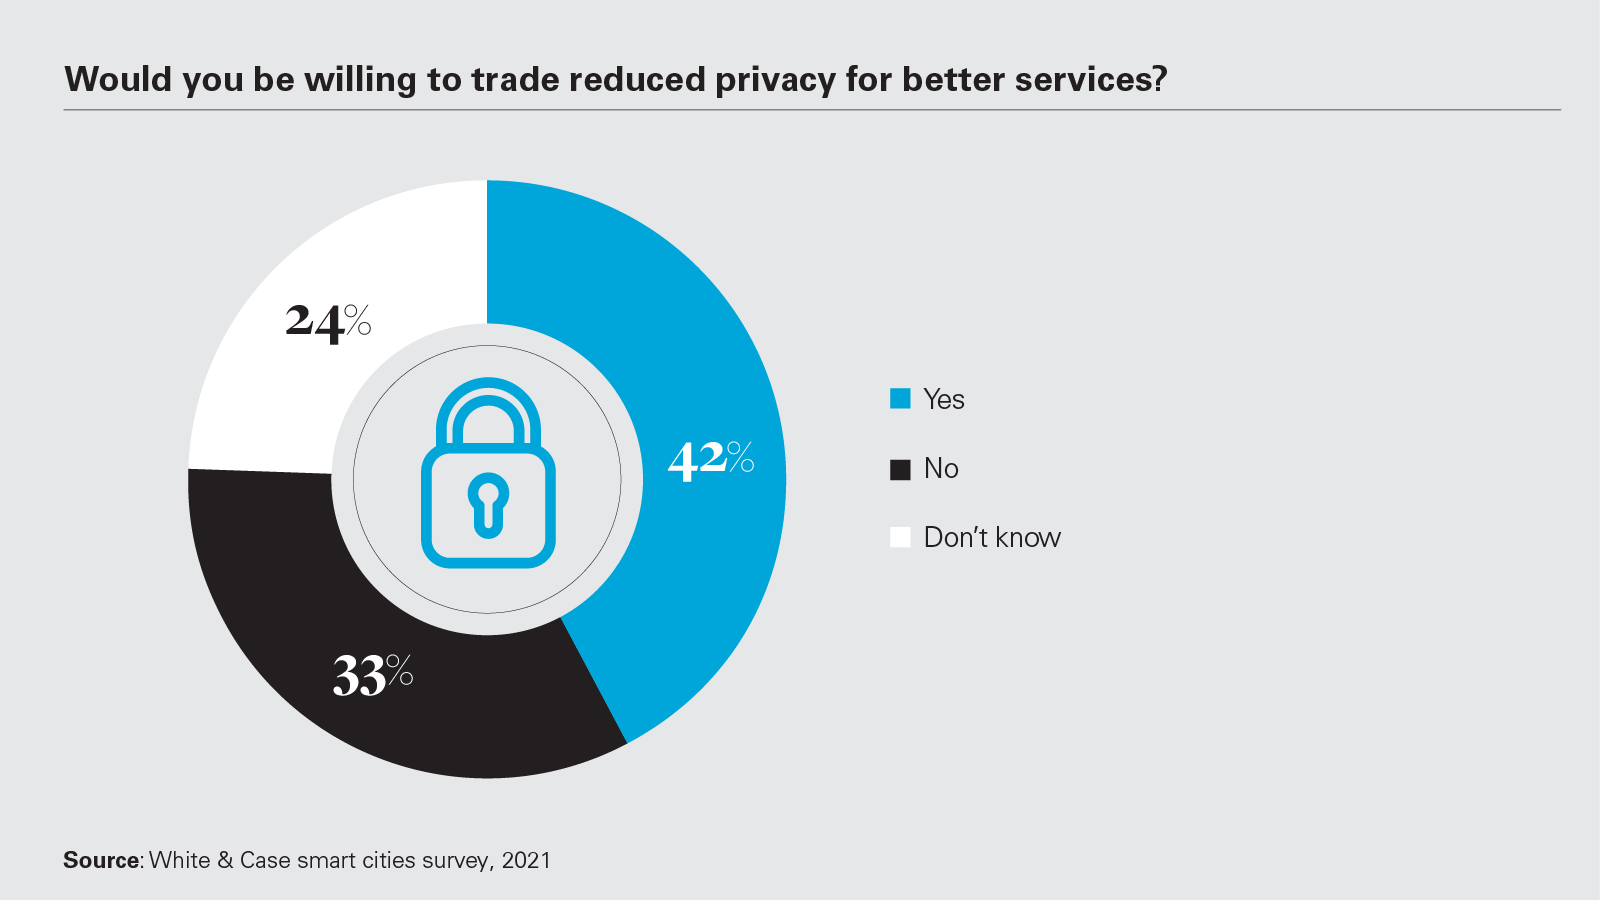 Would you be willing to trade reduced privacy for better services?